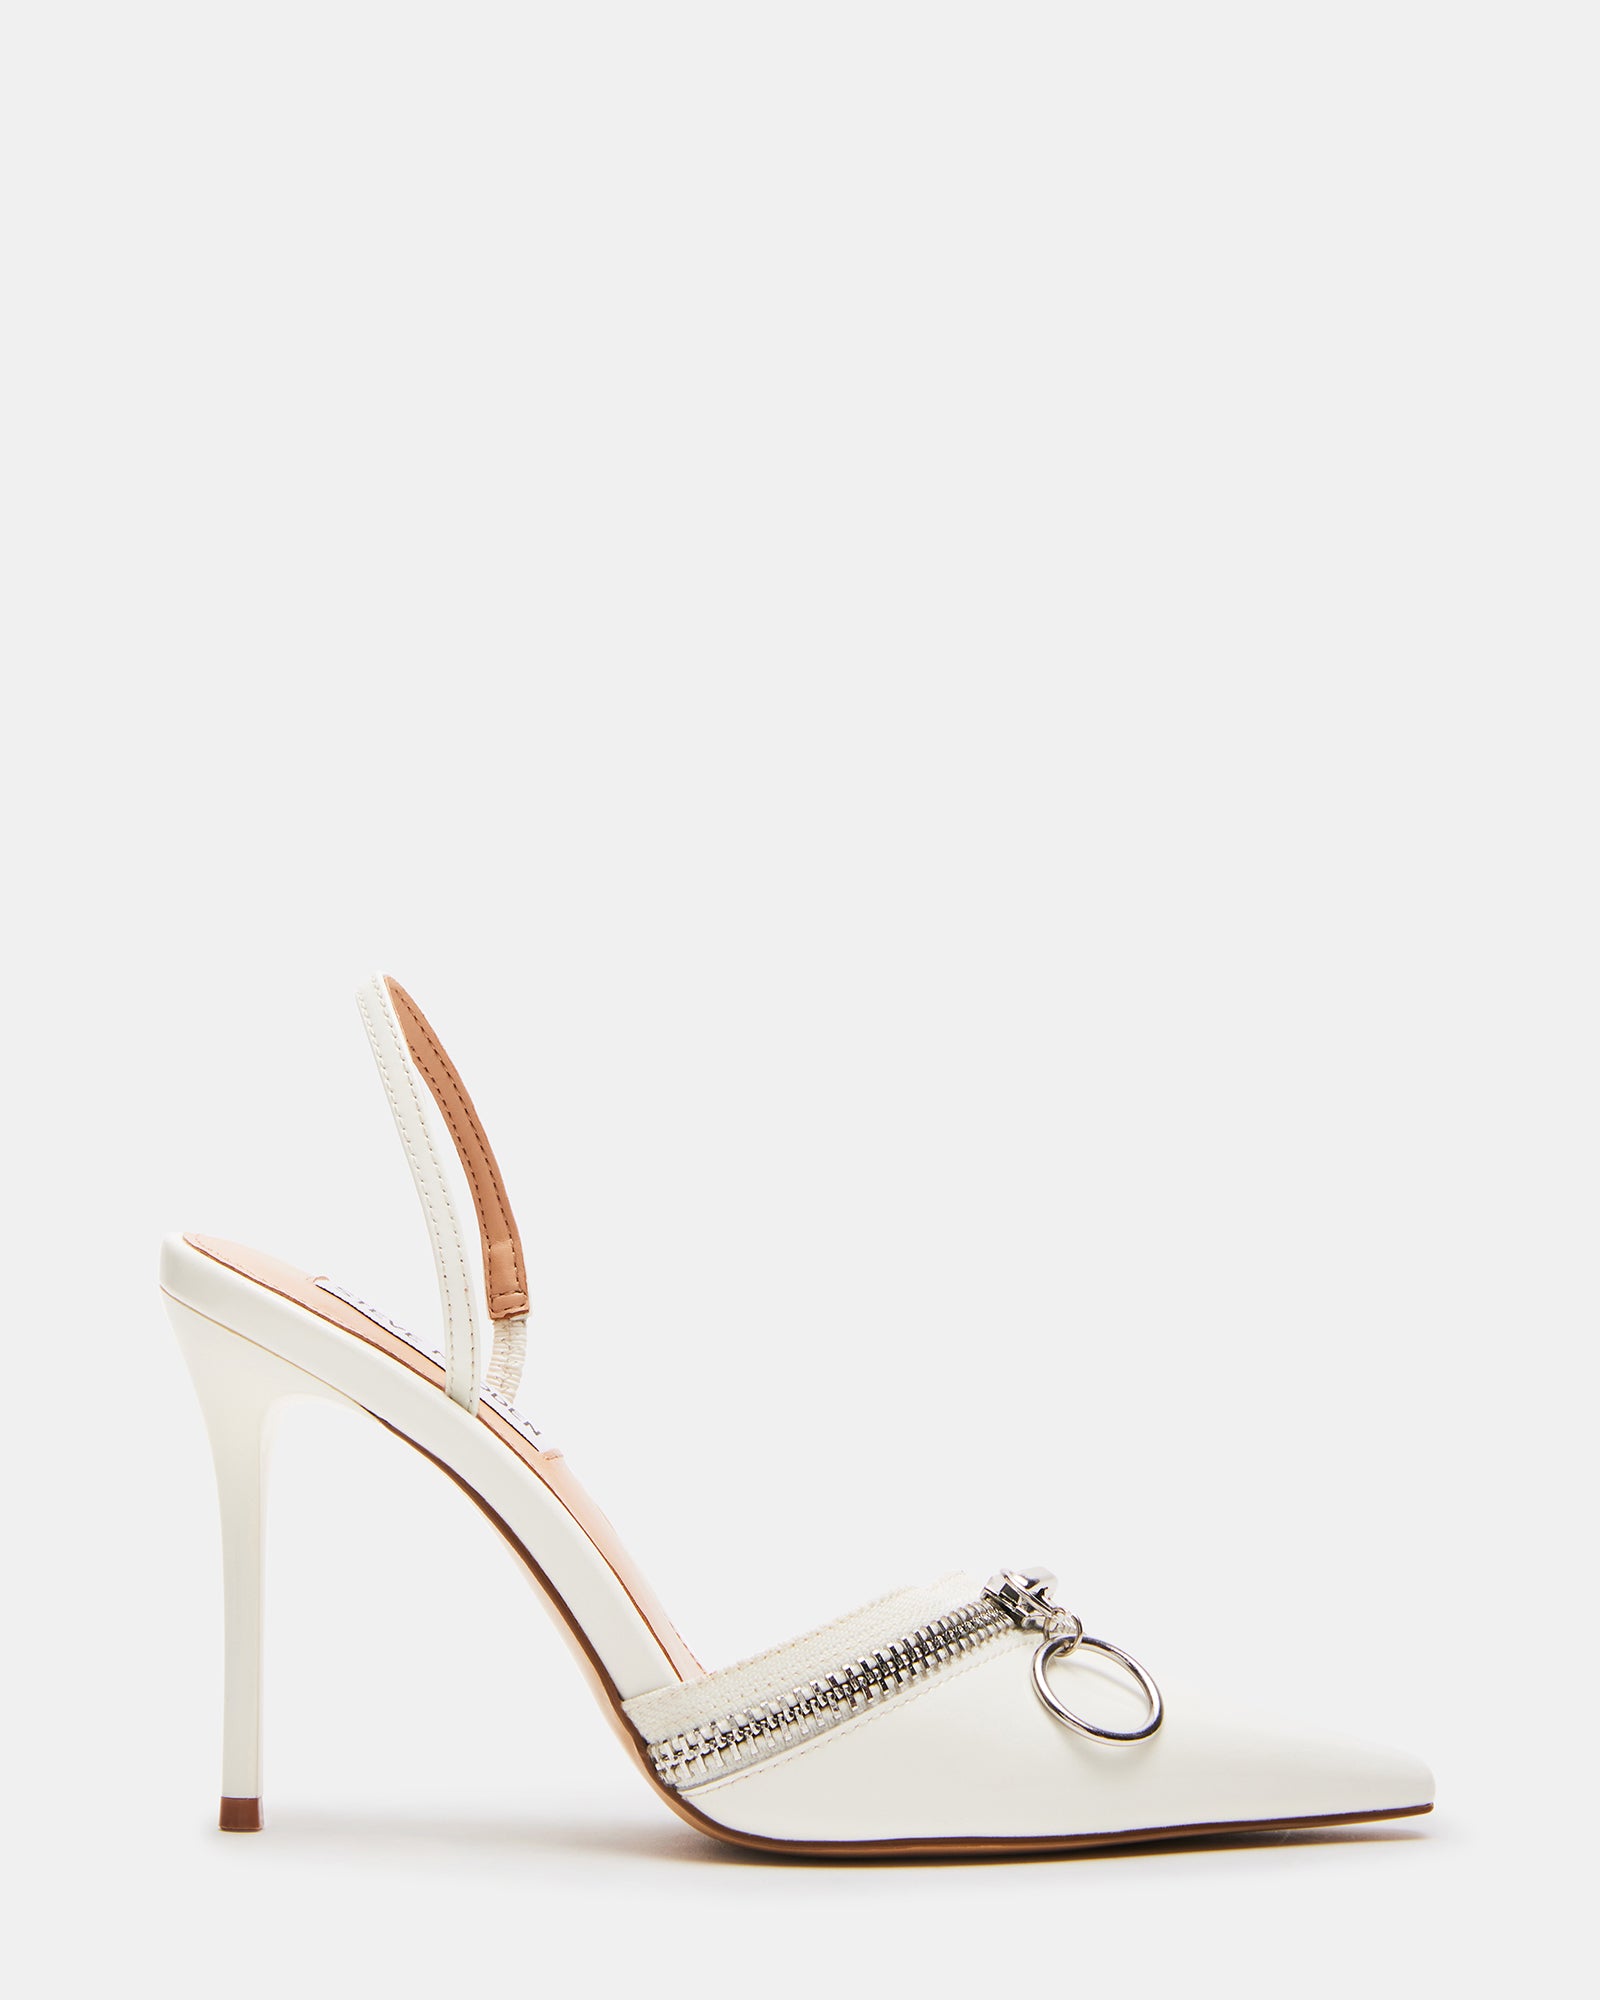 Badgley Mischka - Sophie - Peep Toe Block Heel Platform With Tulle Bow -  White | The White Collection